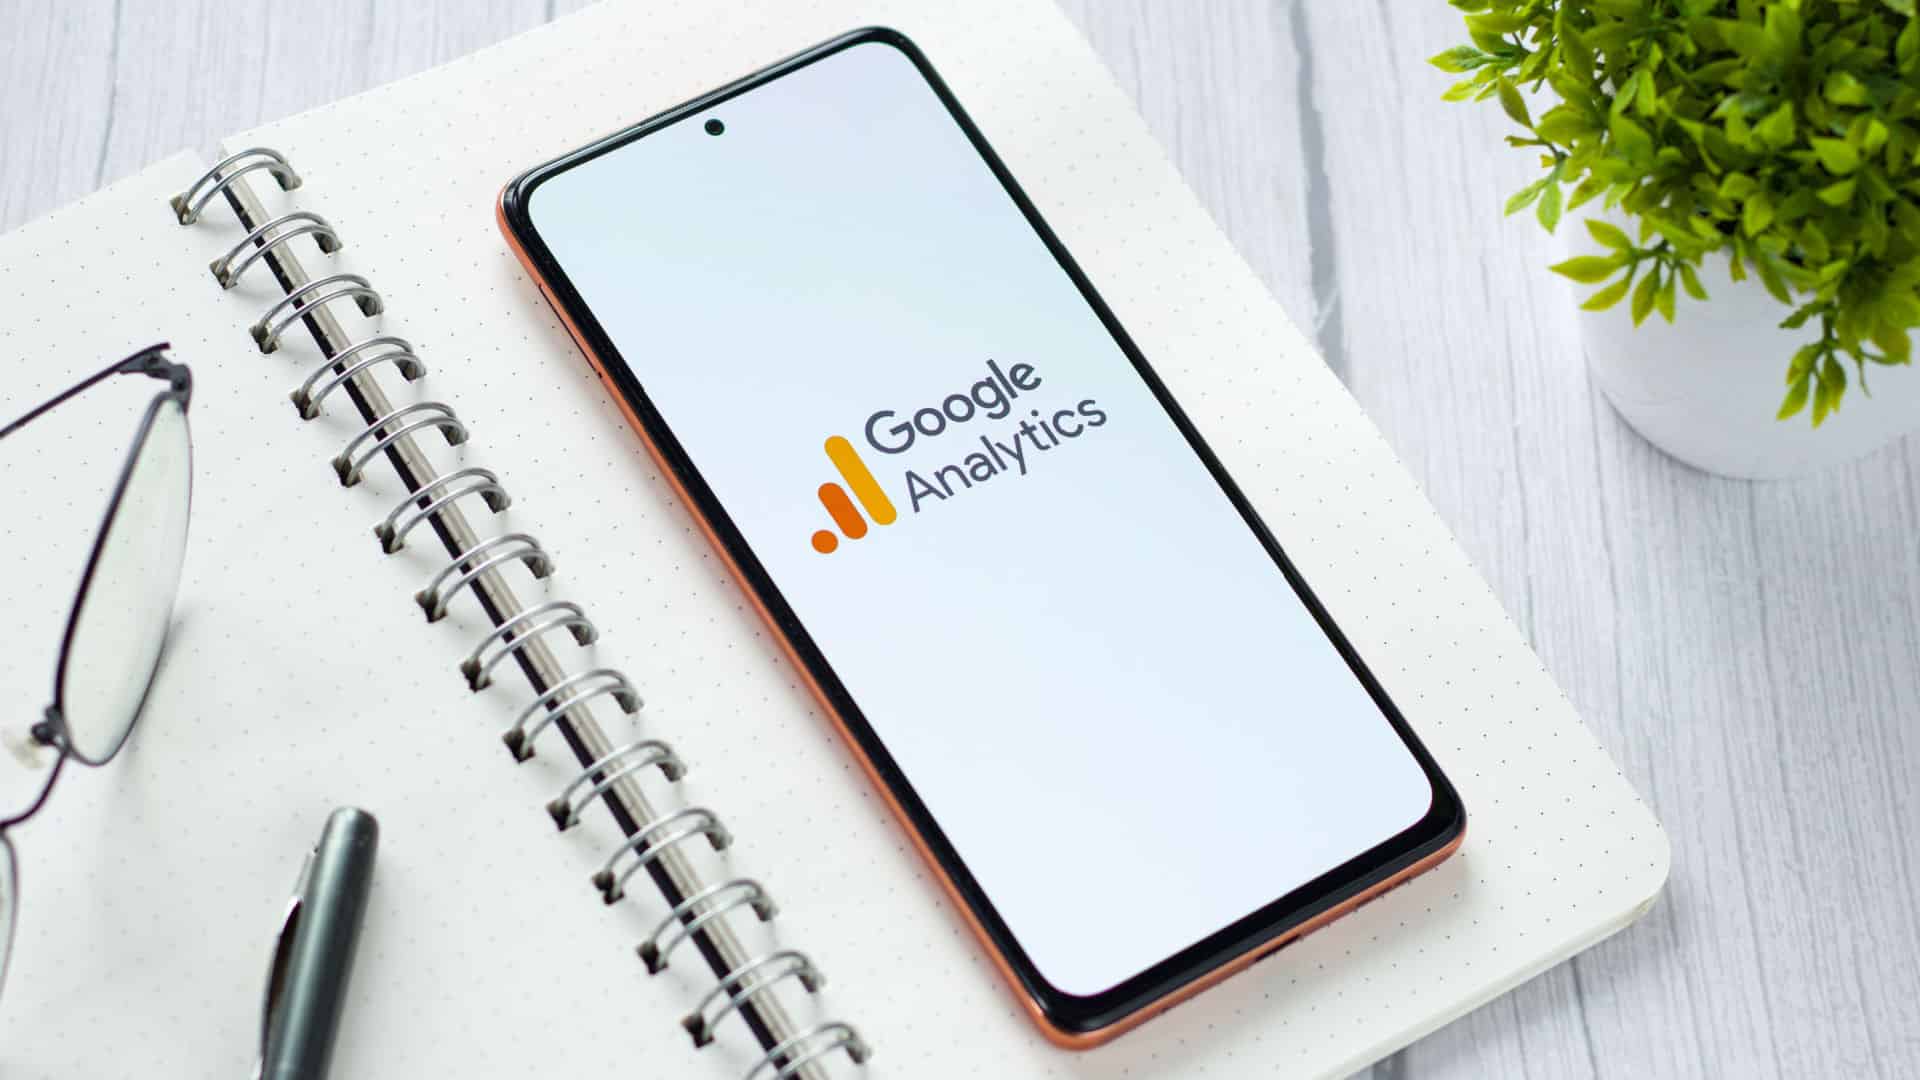 Google Analytics 4 audiences now available in Ad Manager